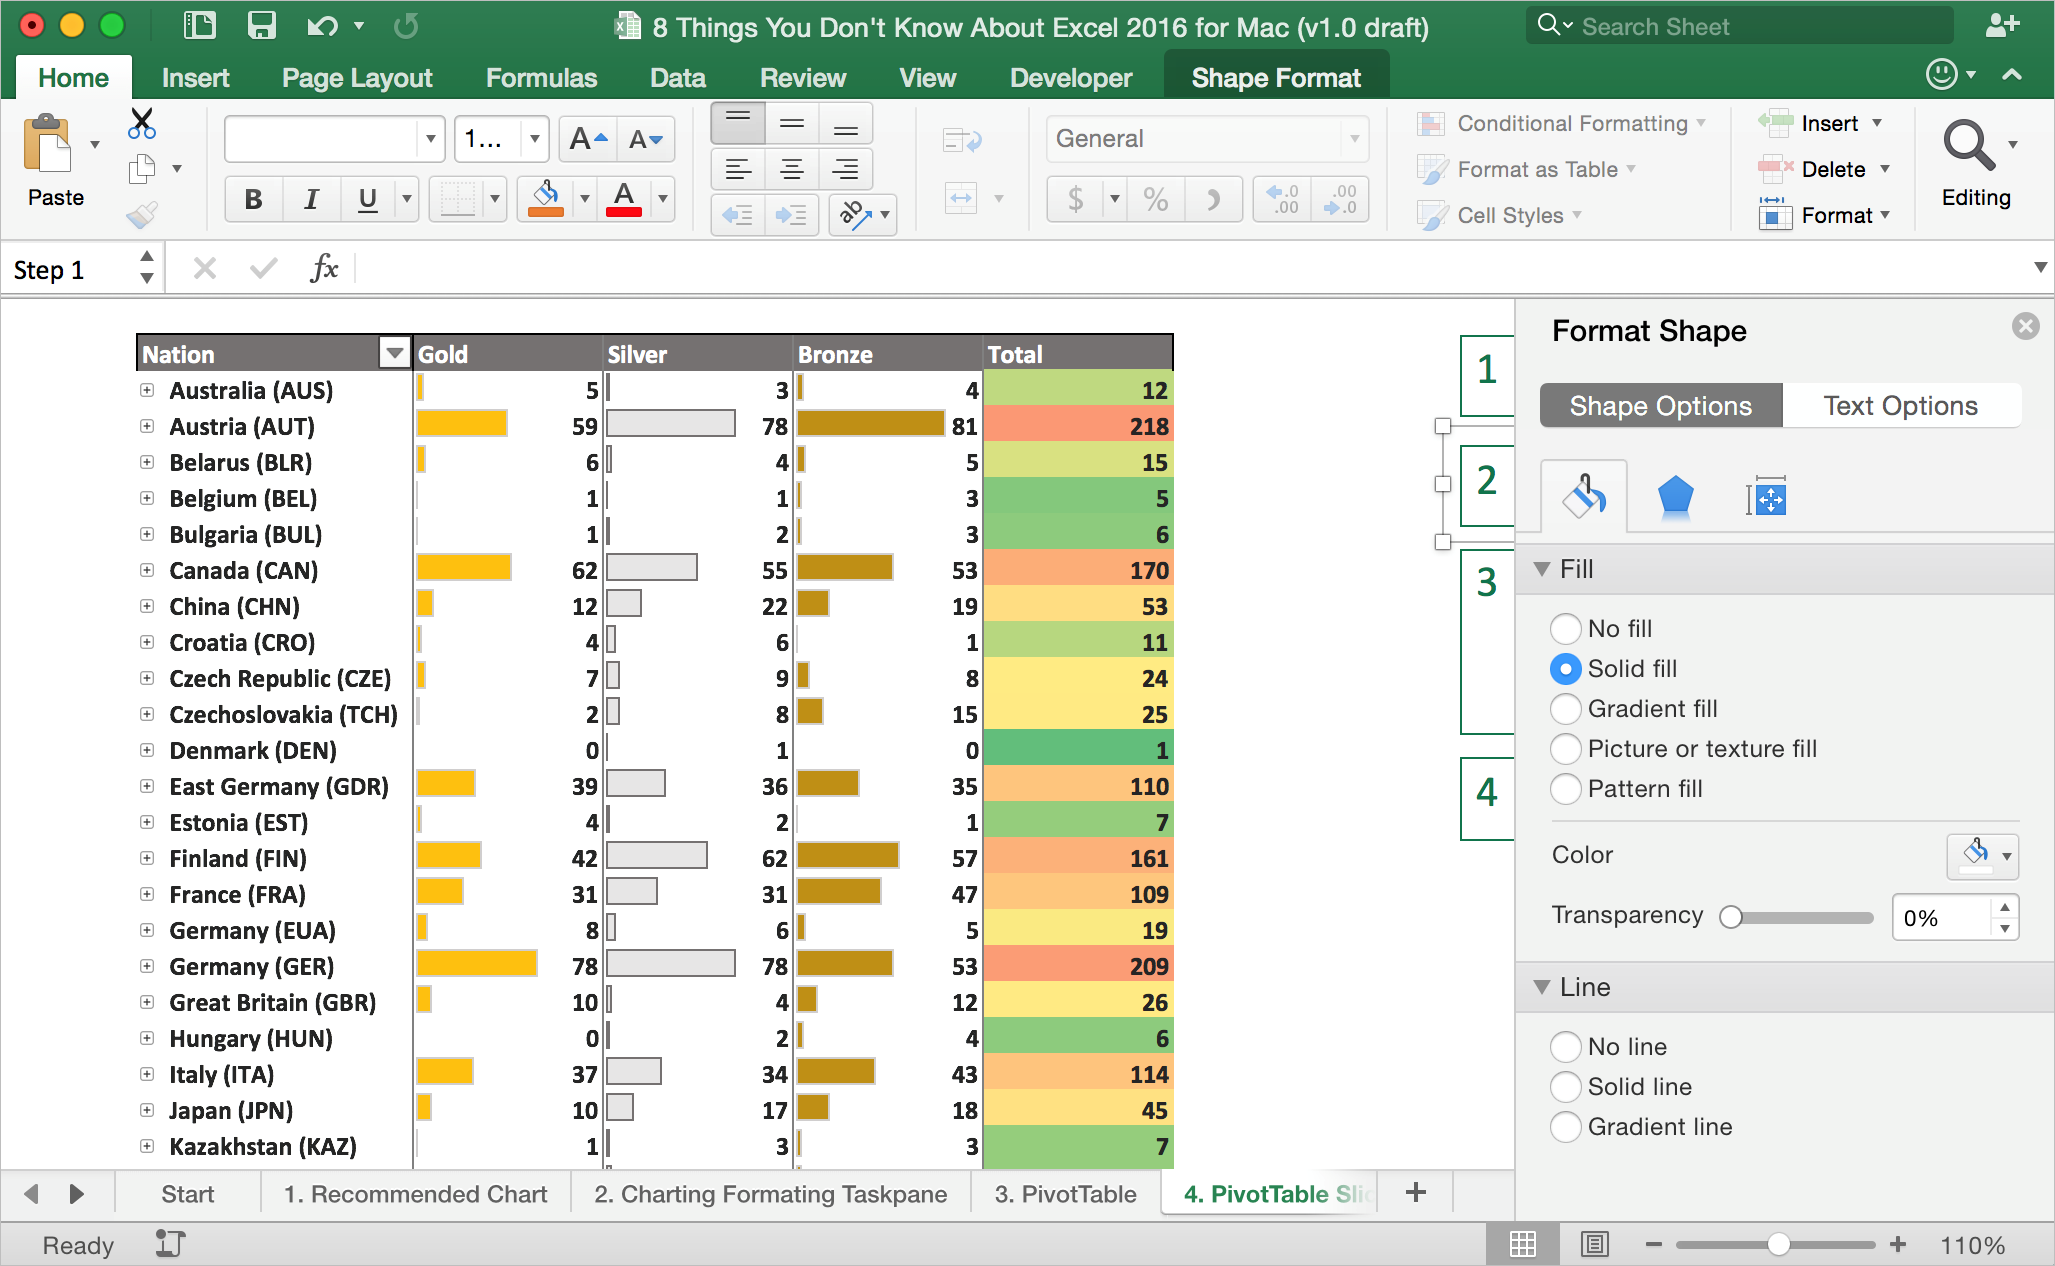 excel for mac 15.33 box and whisker